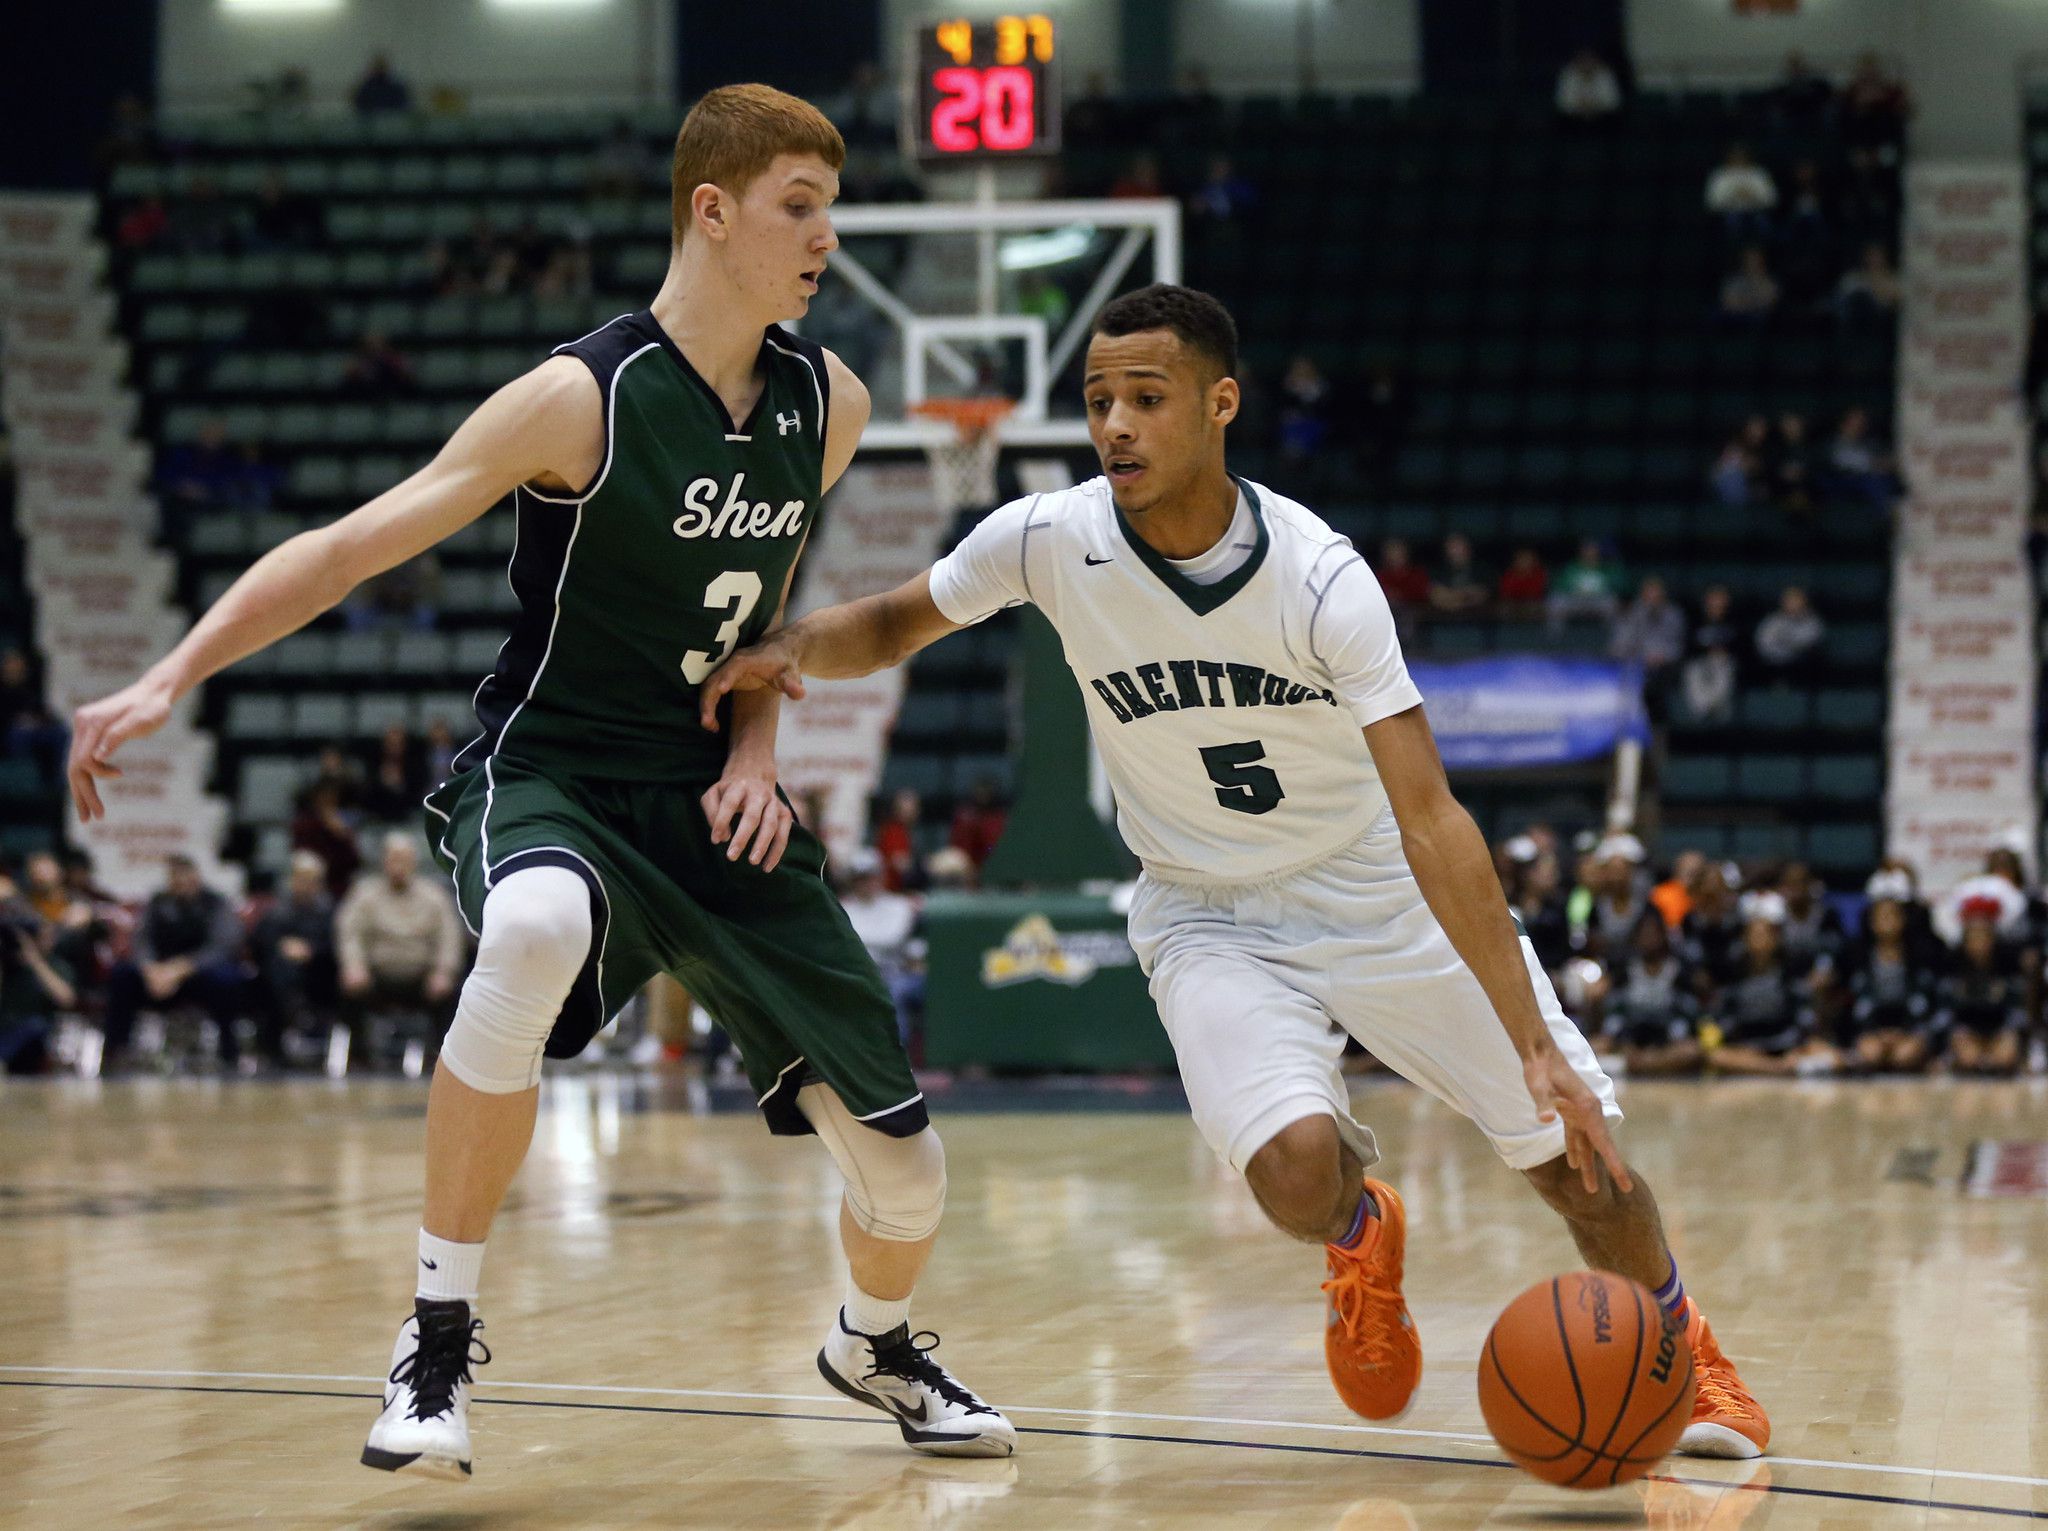 Shenendehowa's Kevin Huerter to play college basketball at Maryland